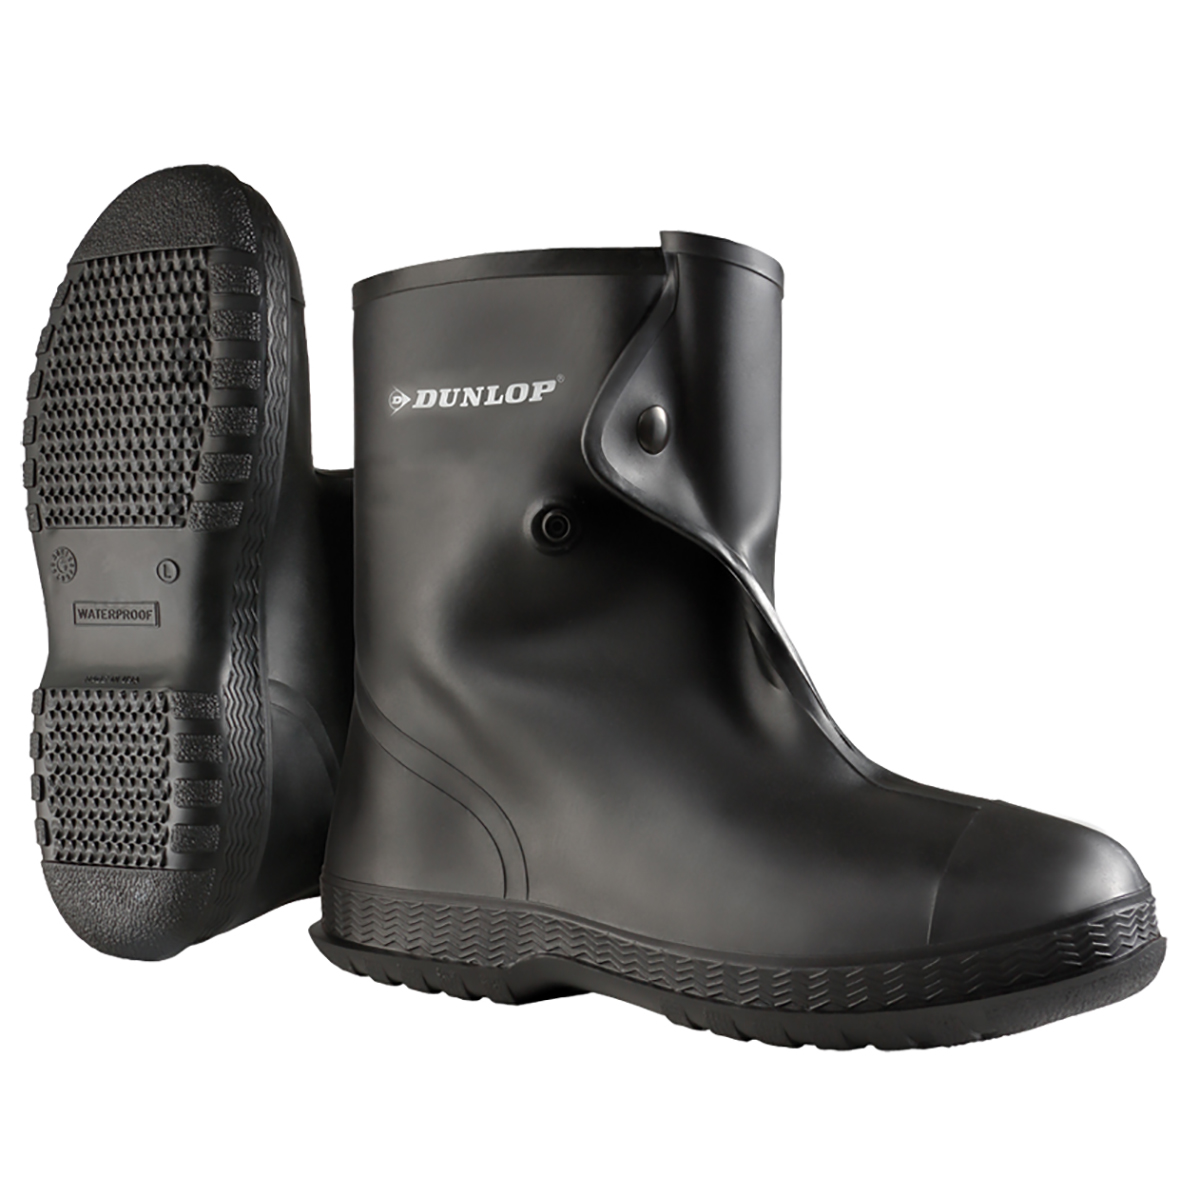 overshoes for work boots